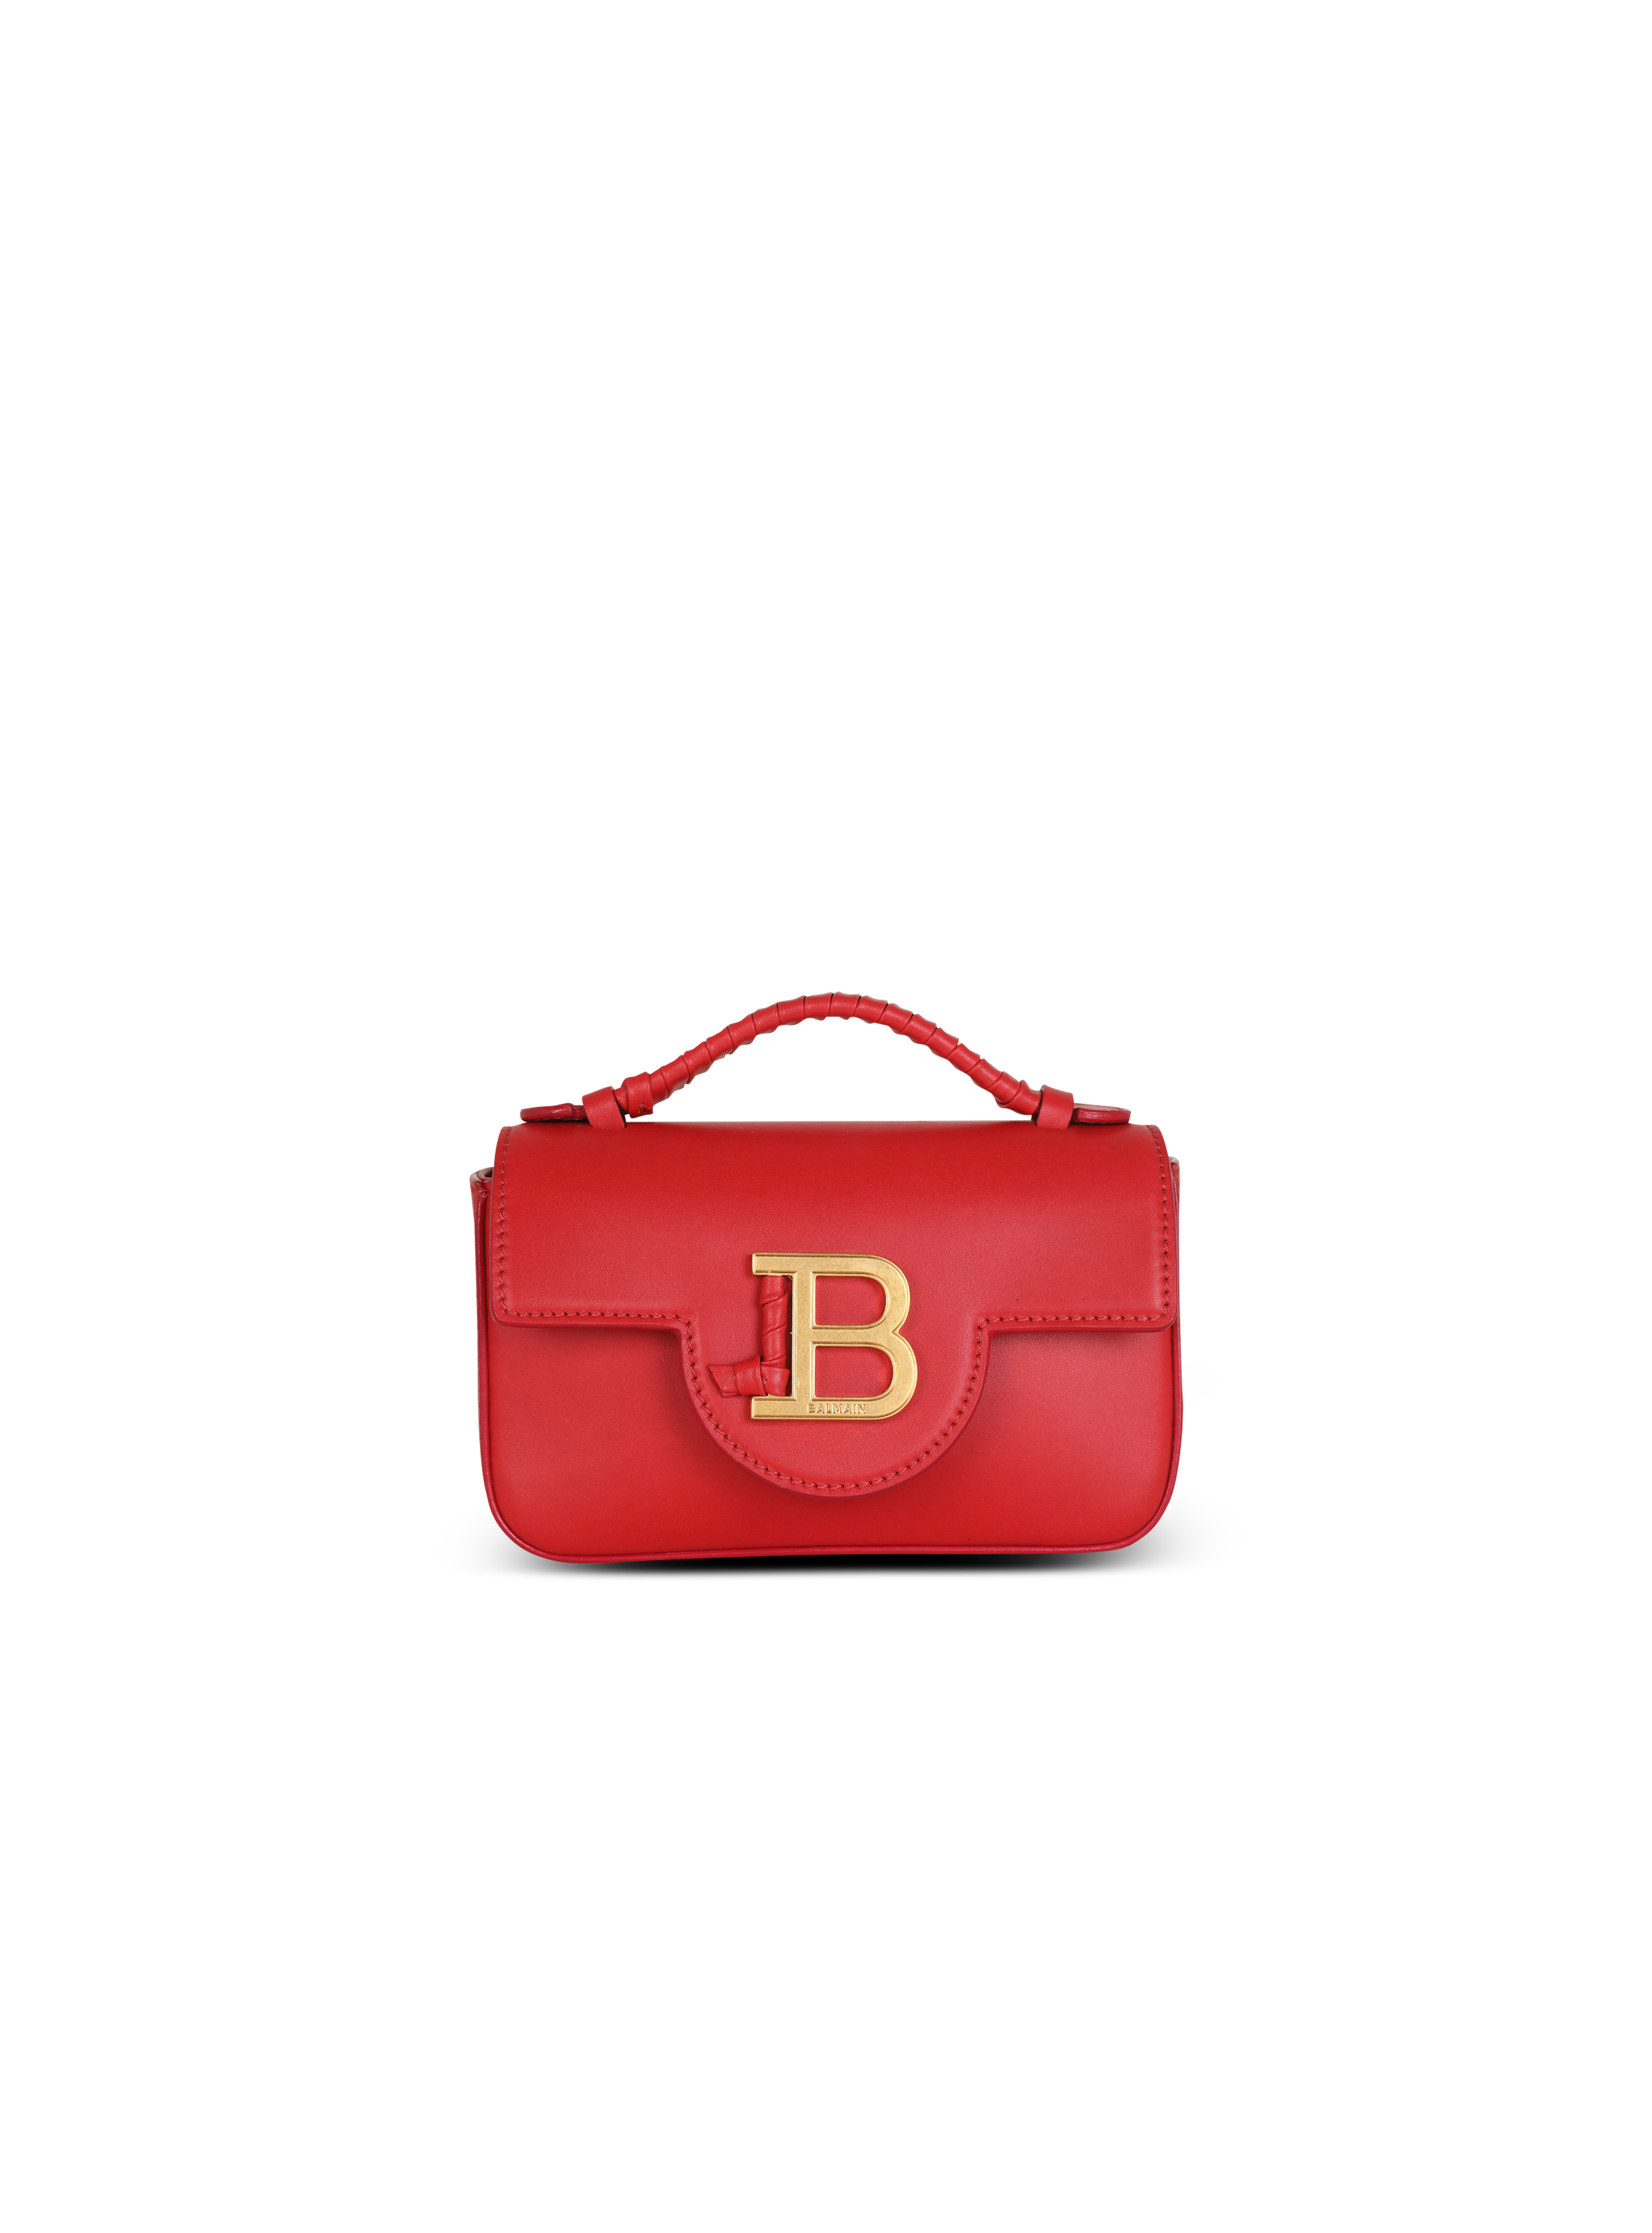 Smooth leather B-Buzz mini bag, red